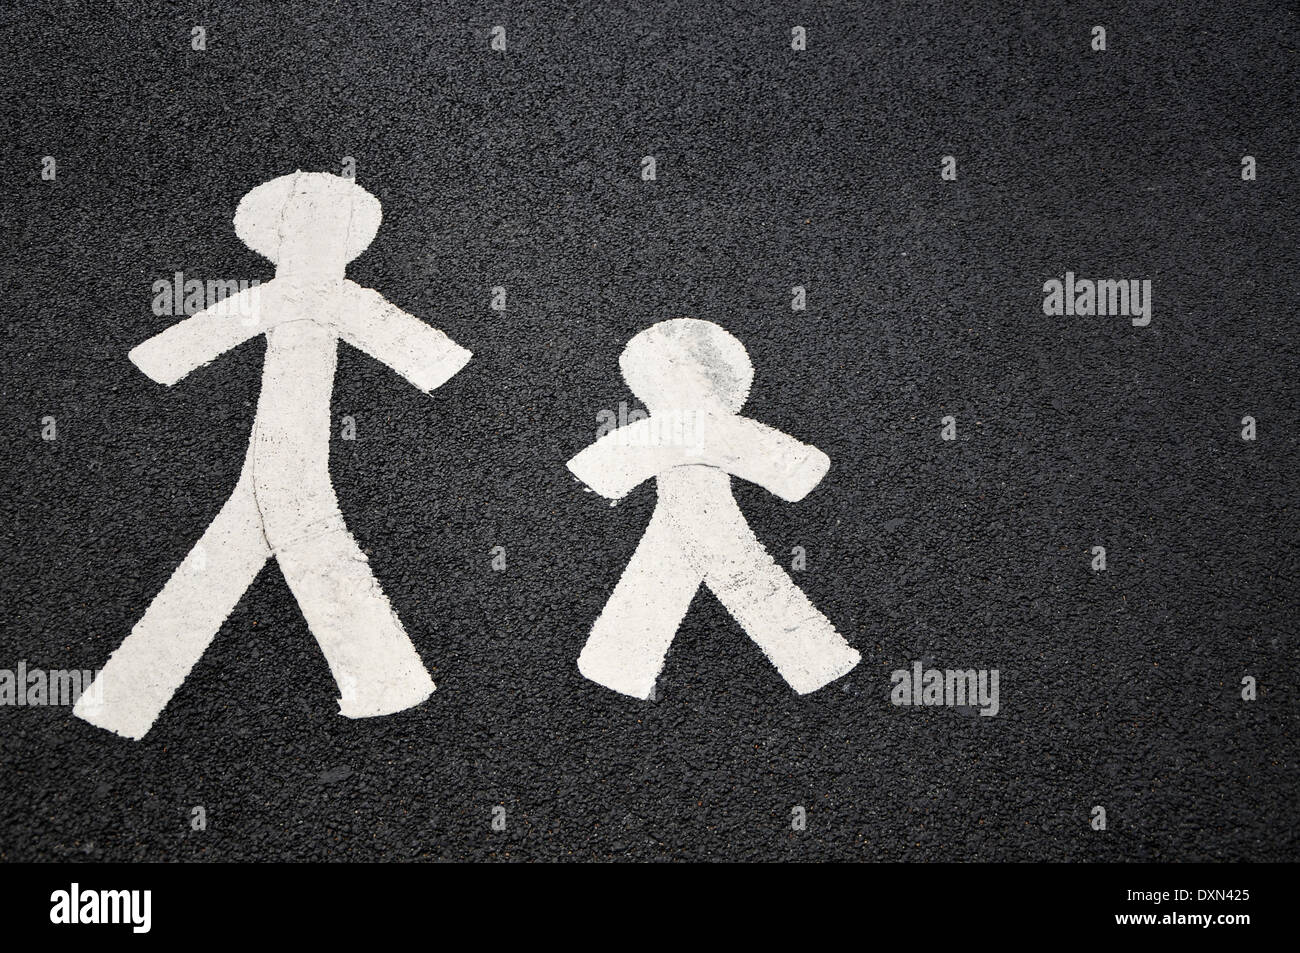 Parent and child road surface markings for parking spaces. Stock Photo